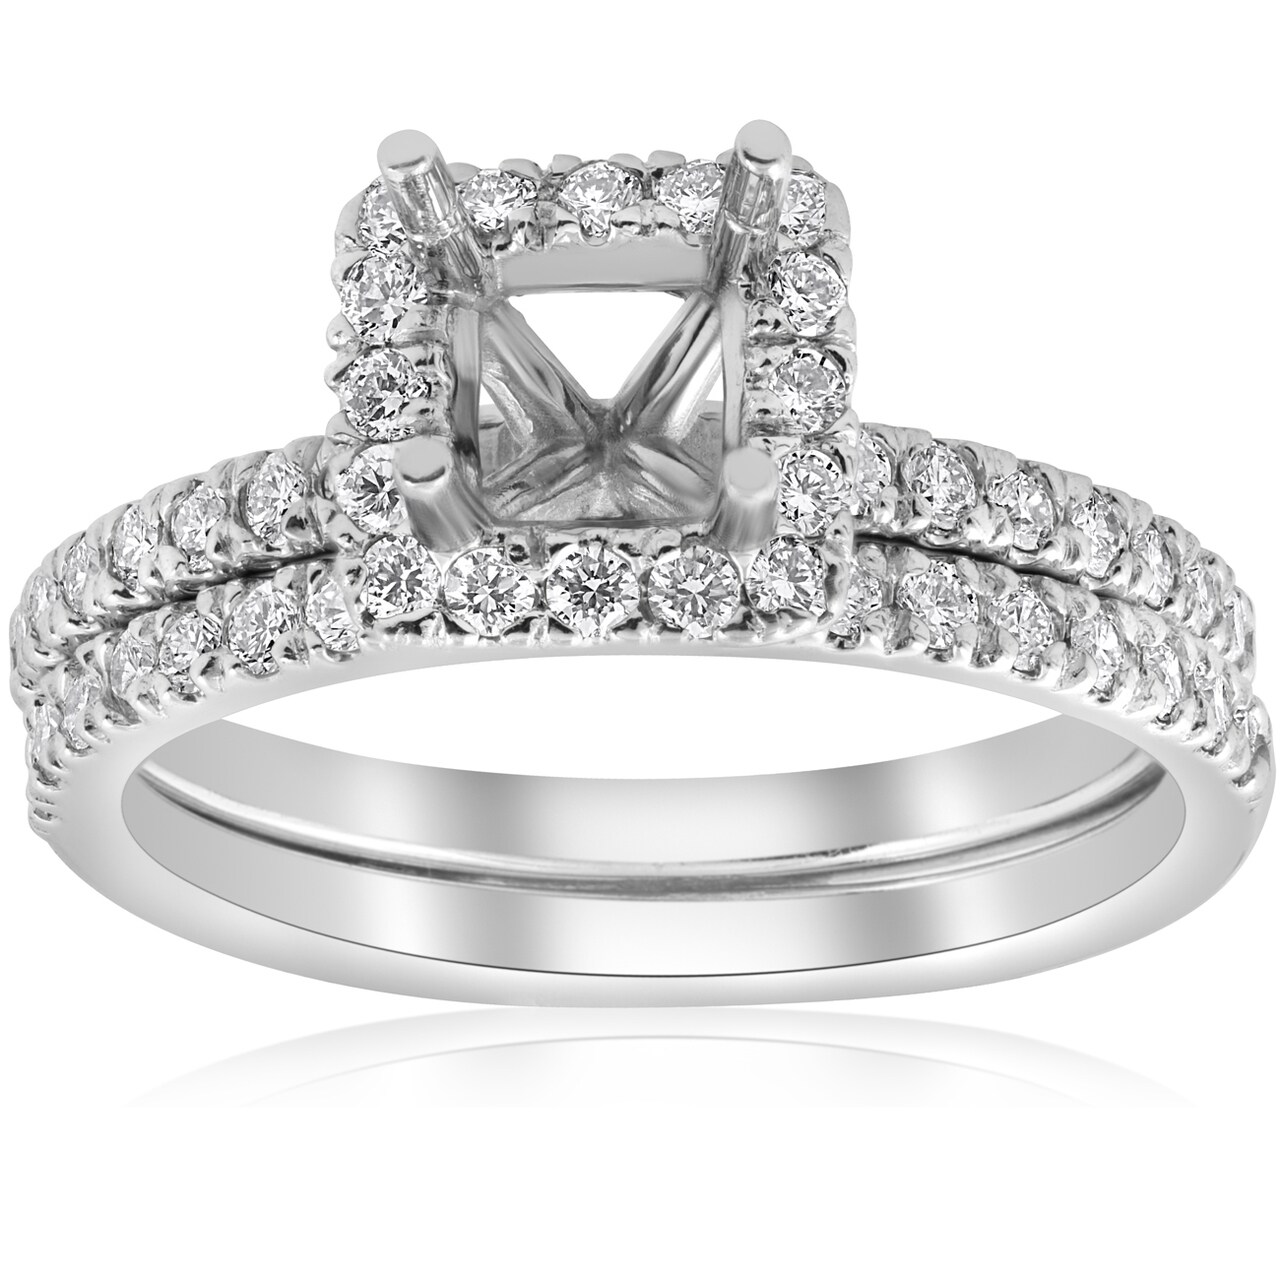 Details about   Unique Princess Cut Diamond Halo Style Wedding Dainty Ring 14K White Gold Finish